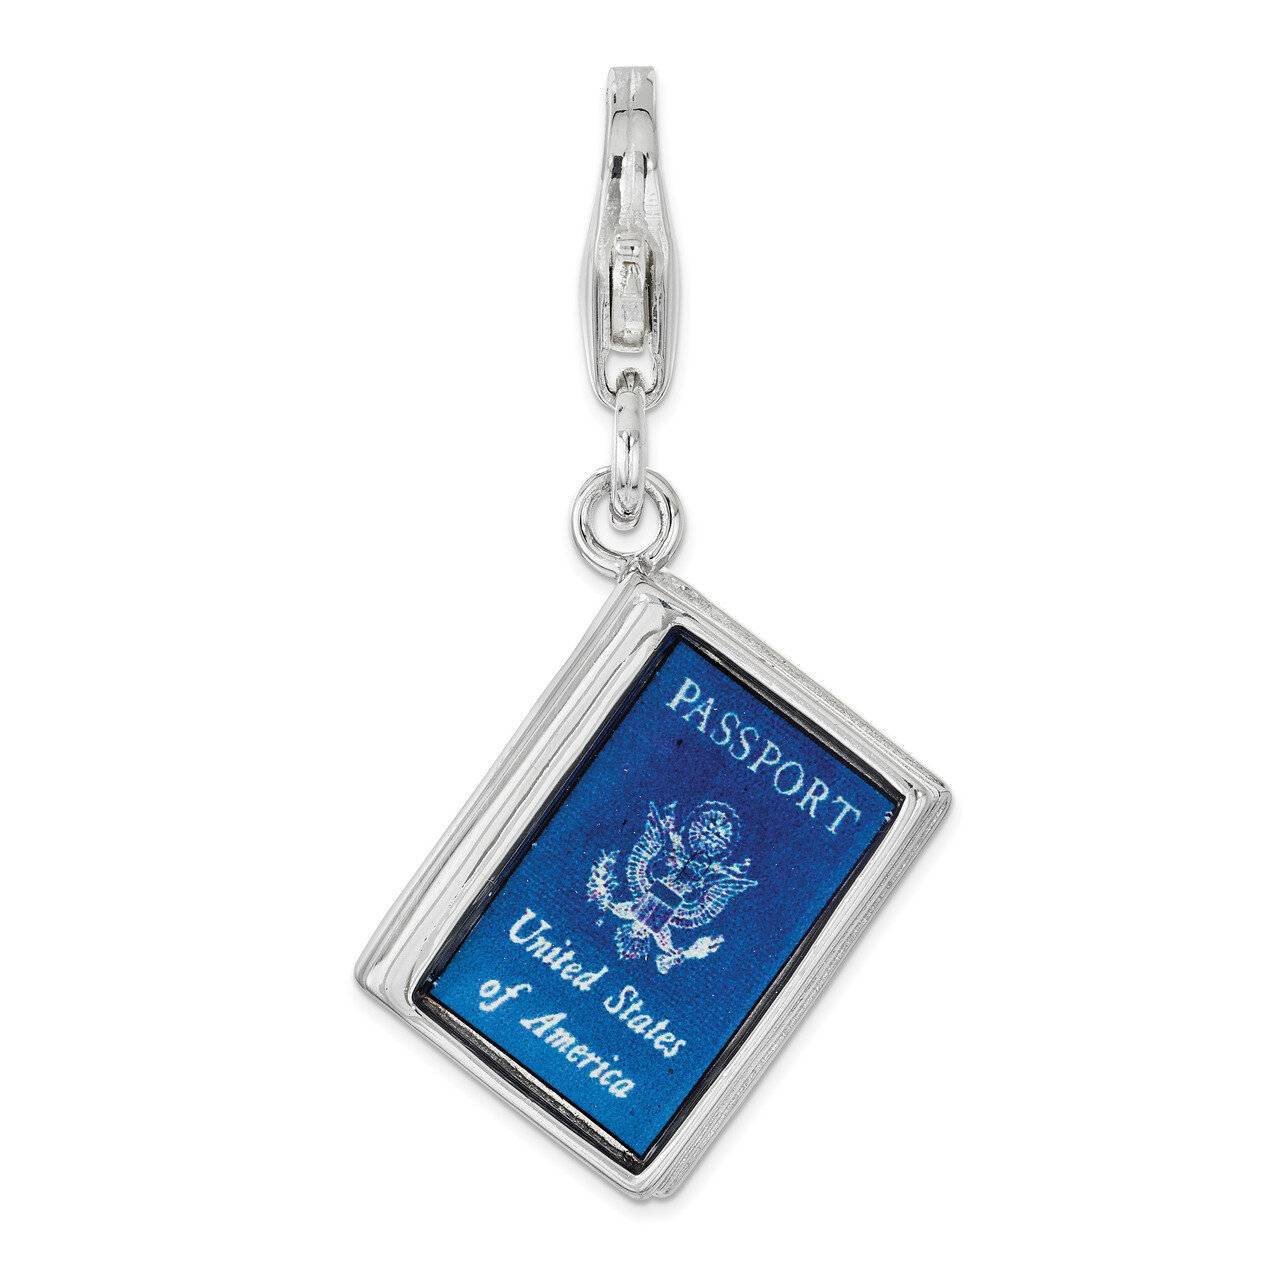 3D Passport Charm - Sterling Silver Enameled QCC1200